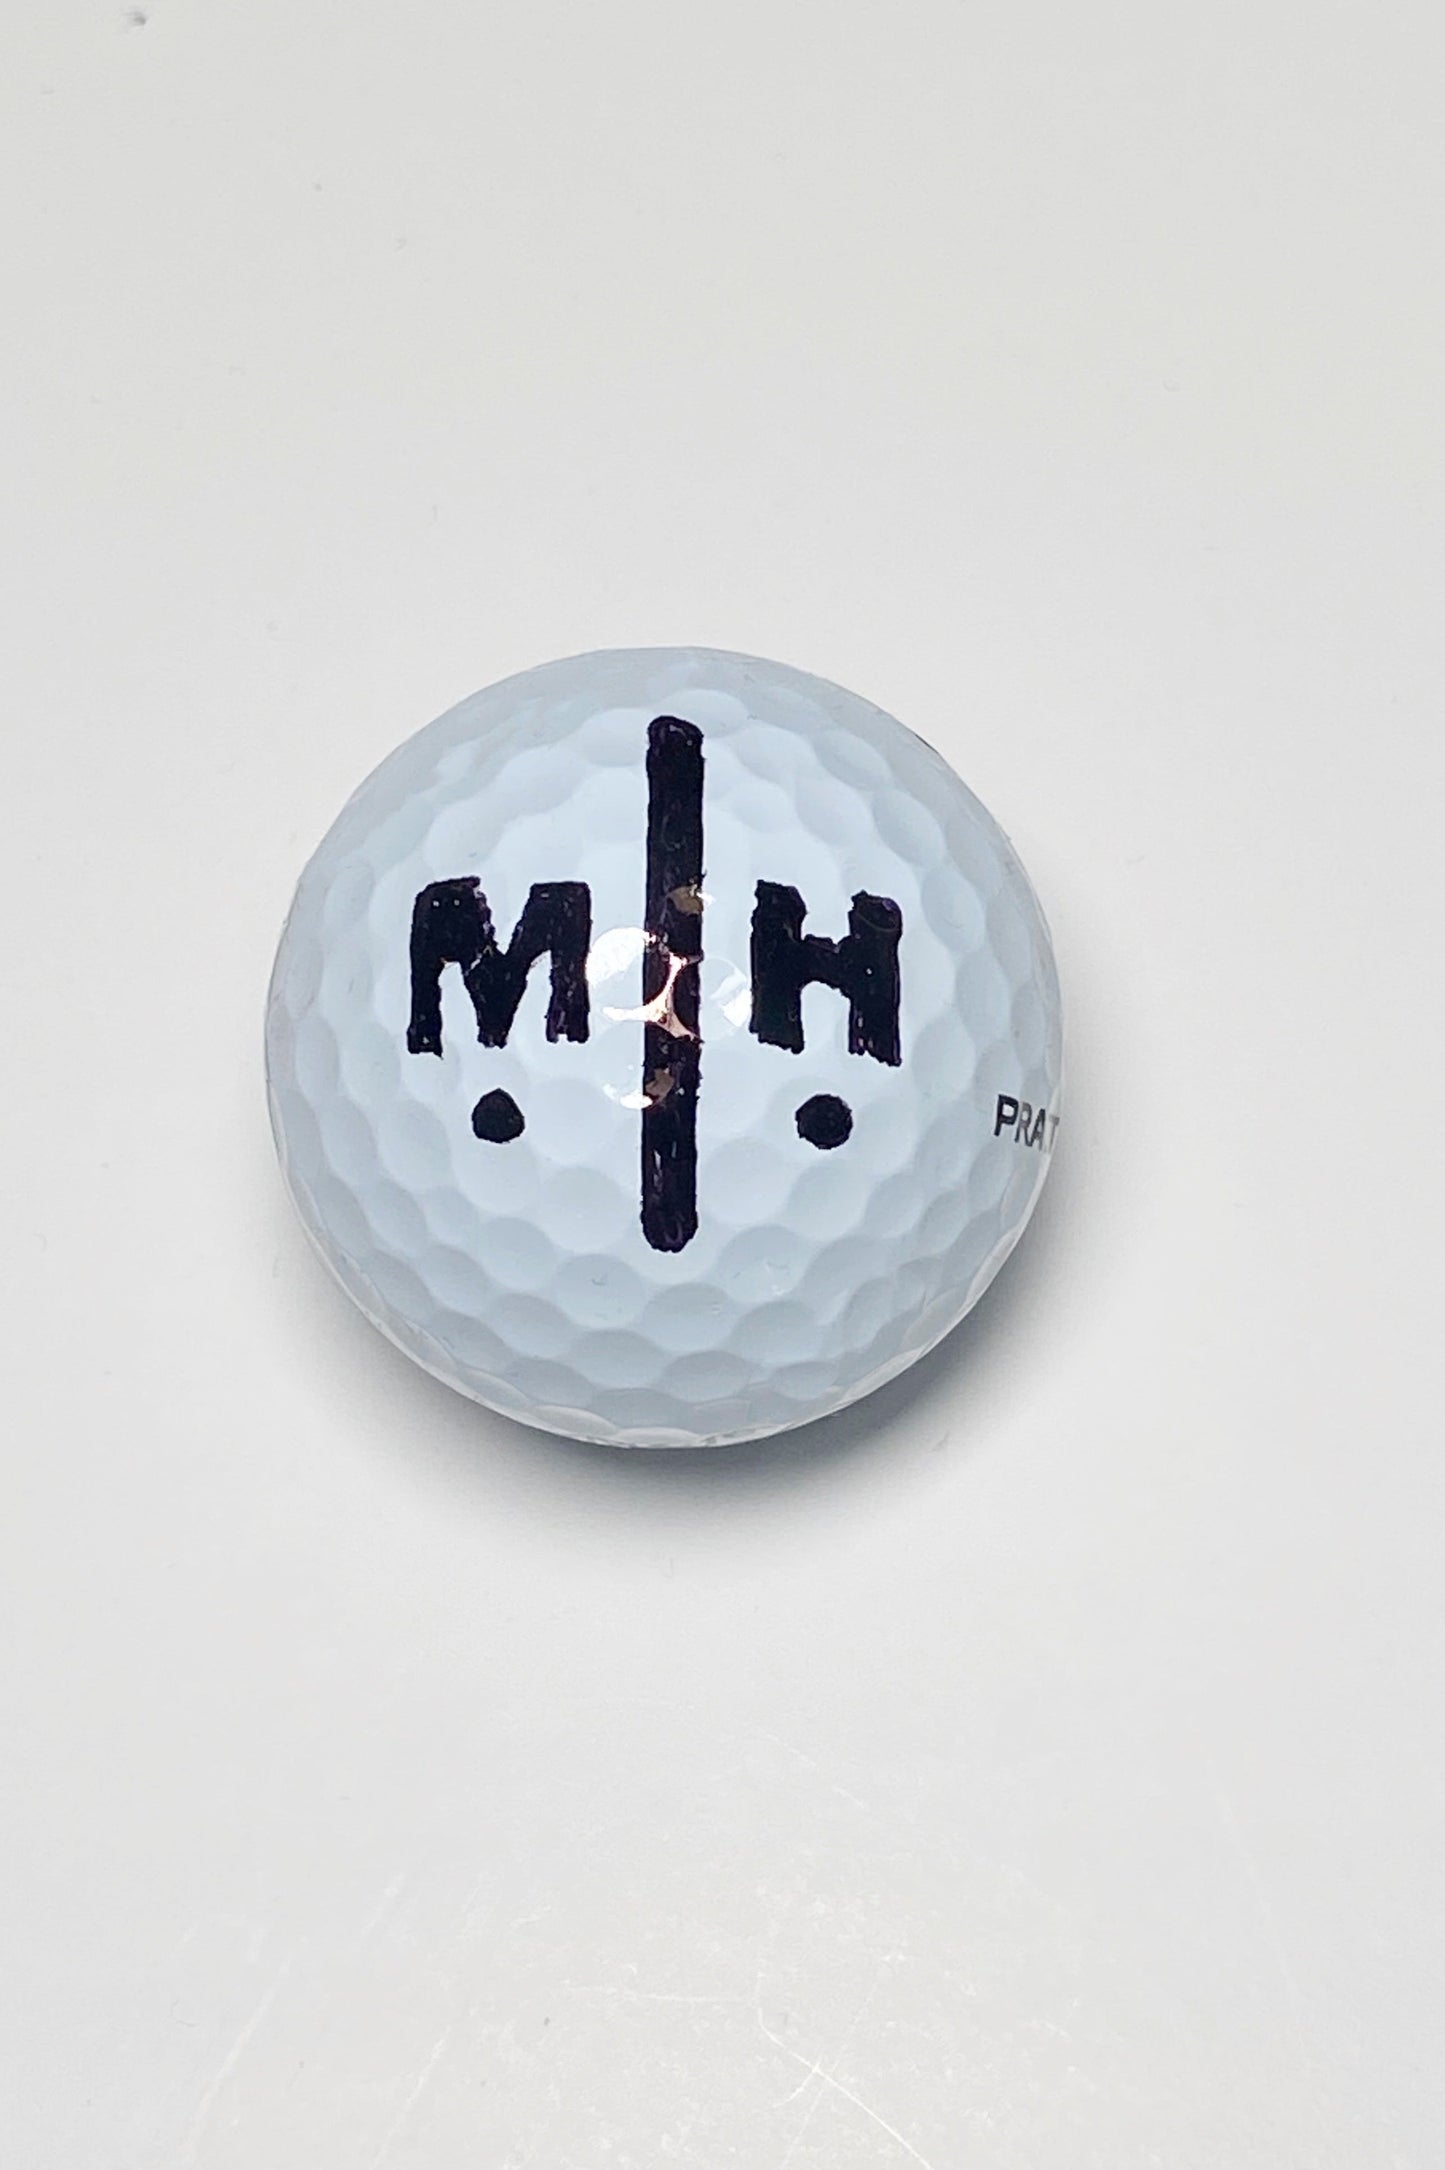 Personalized Golf Ball Marking Stencil with Vertical Alignment Lines  - 3D Printed